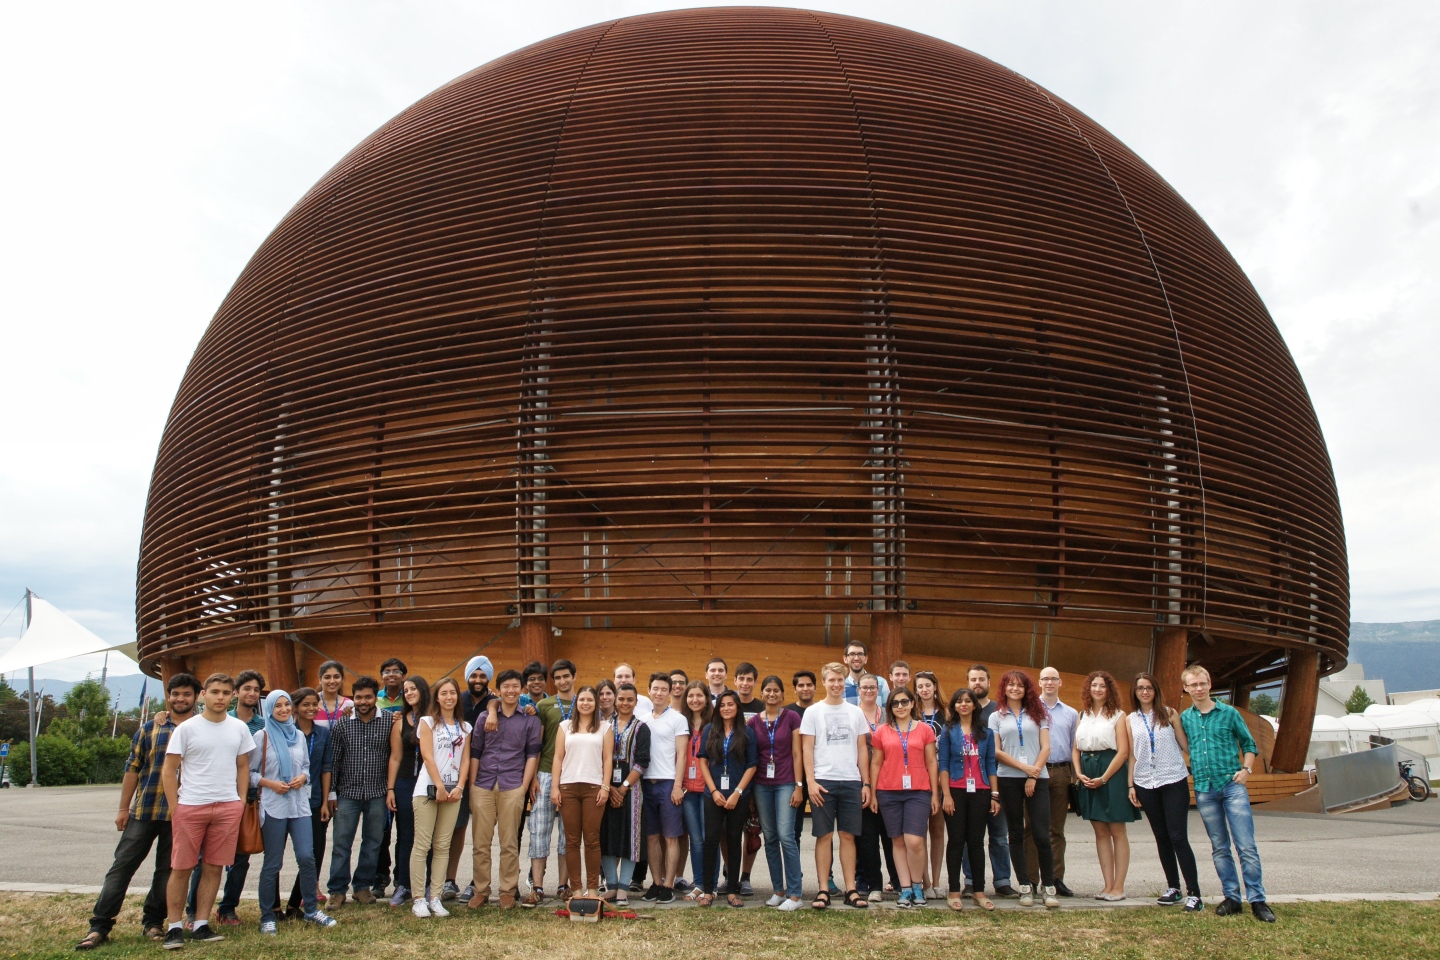 Applications open for 2017 CERN openlab student programme